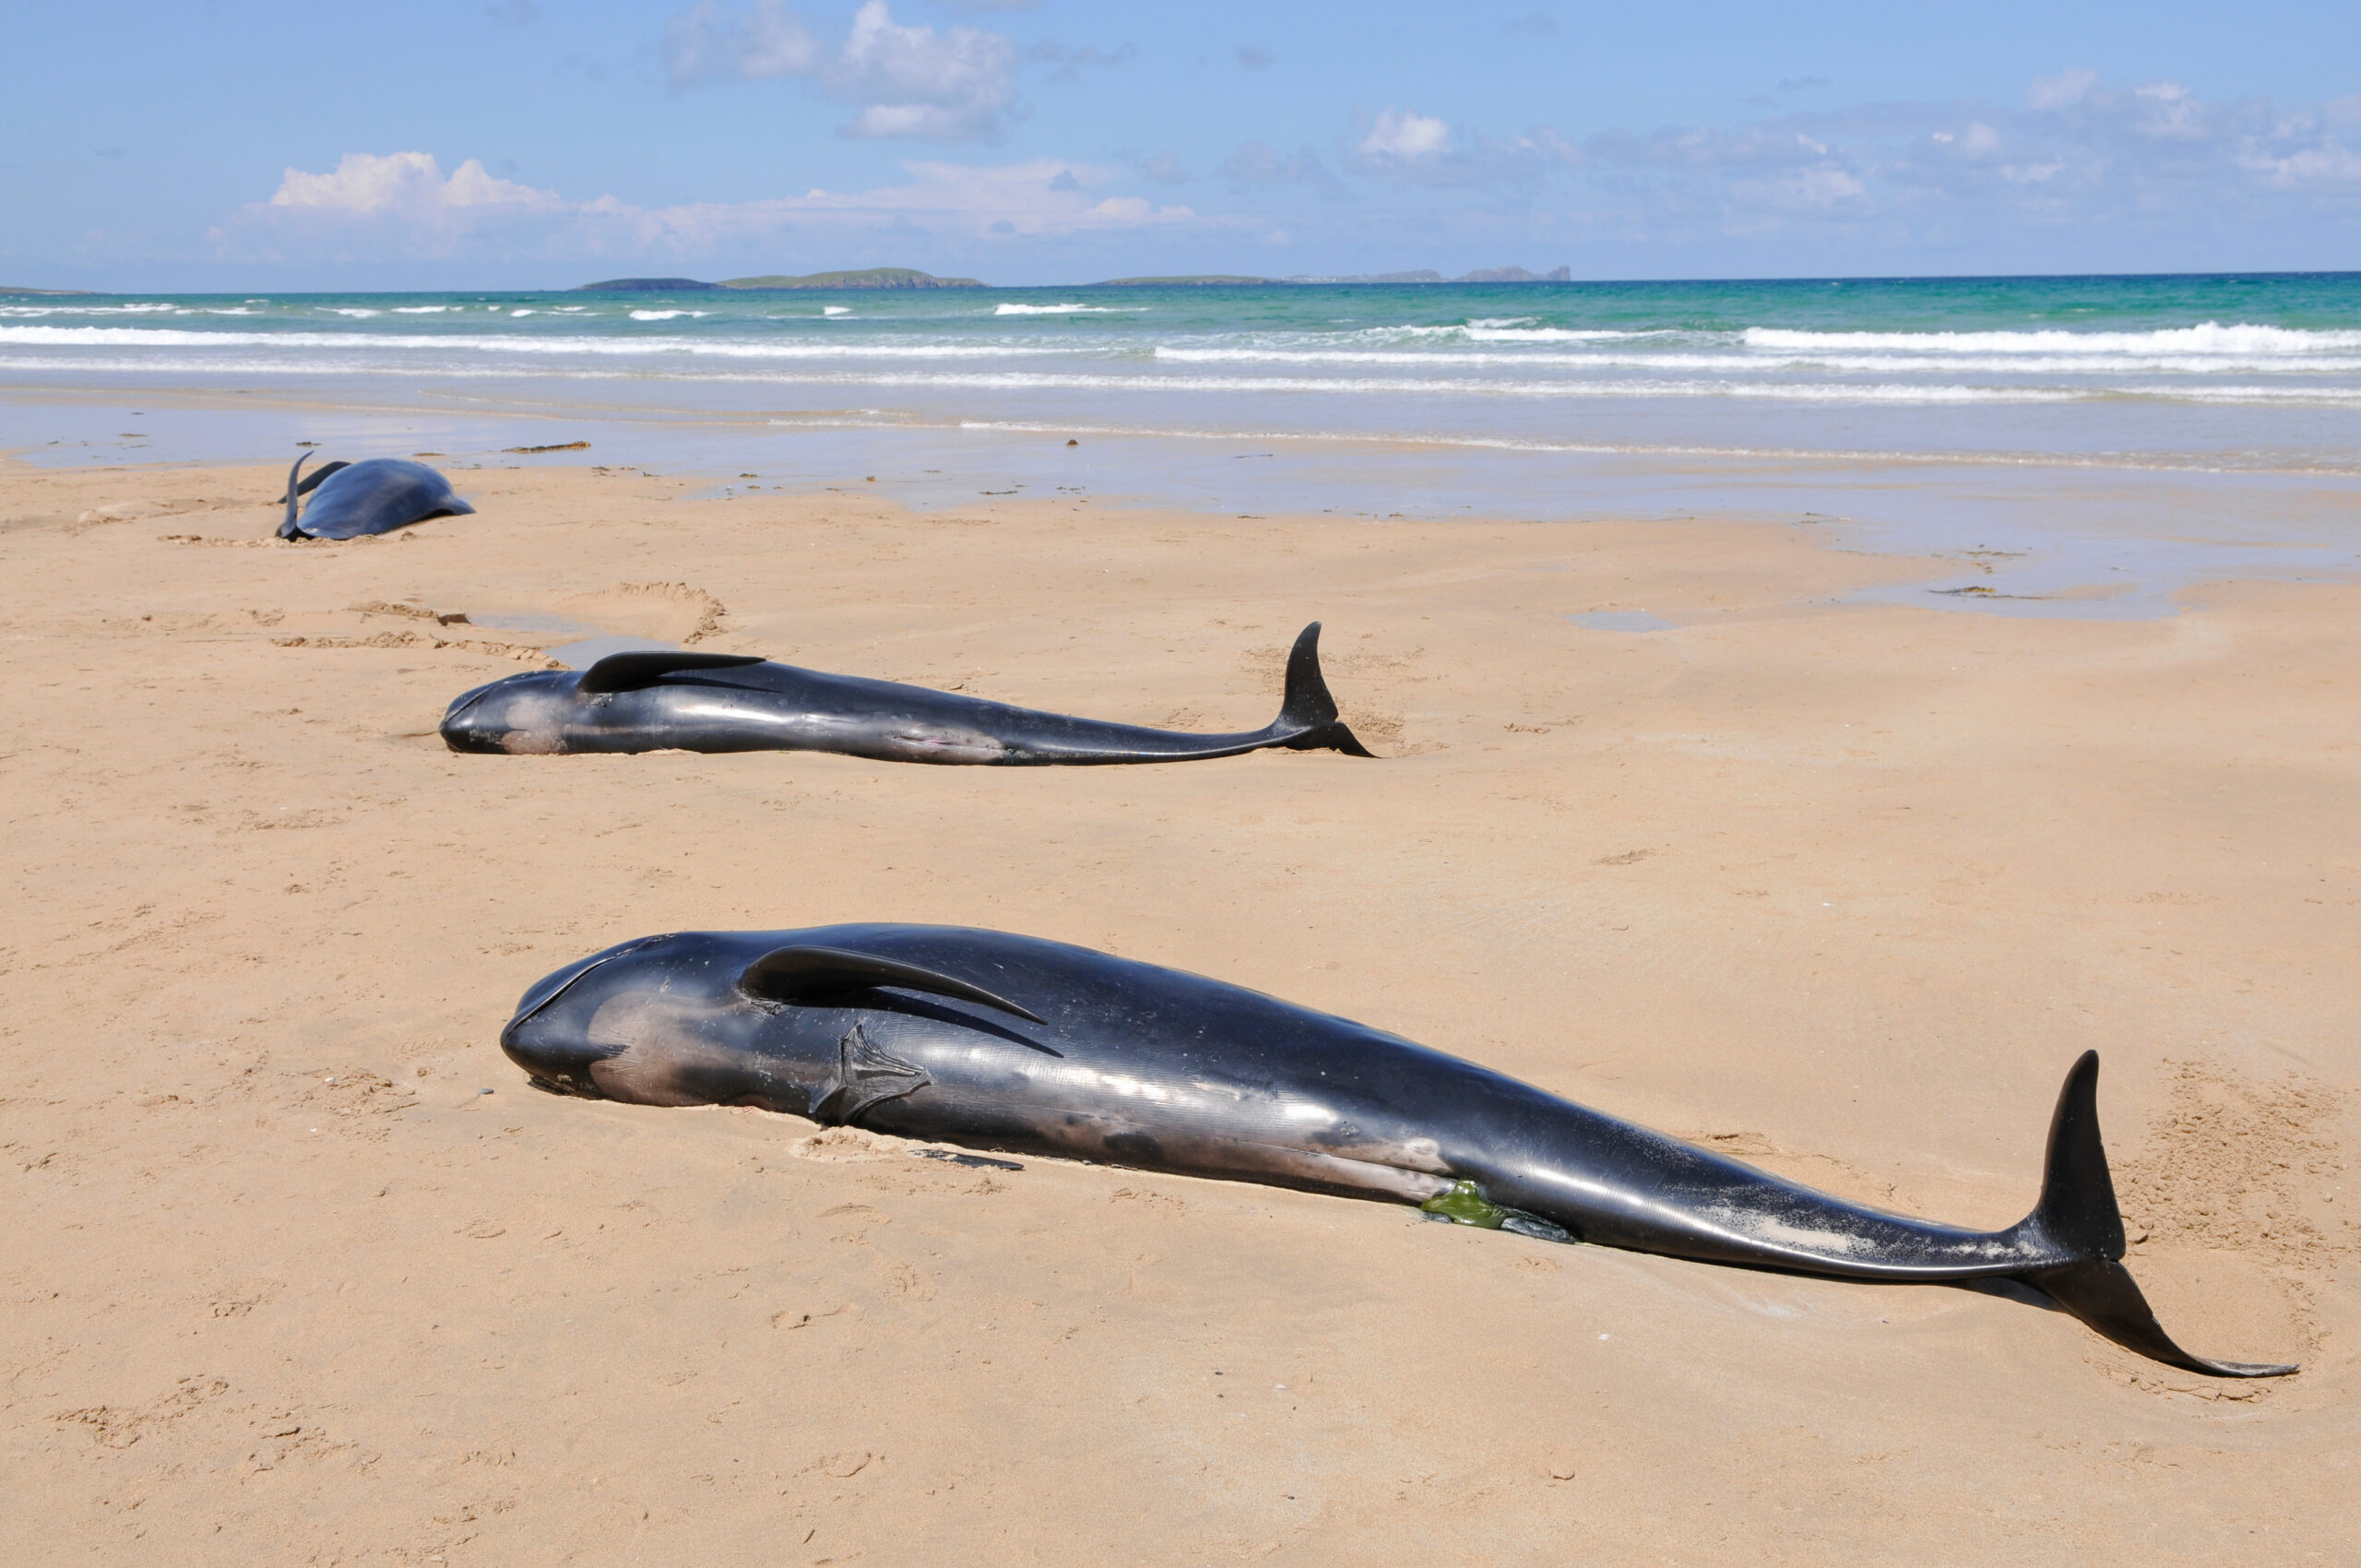 What causes pilot whale strandings?